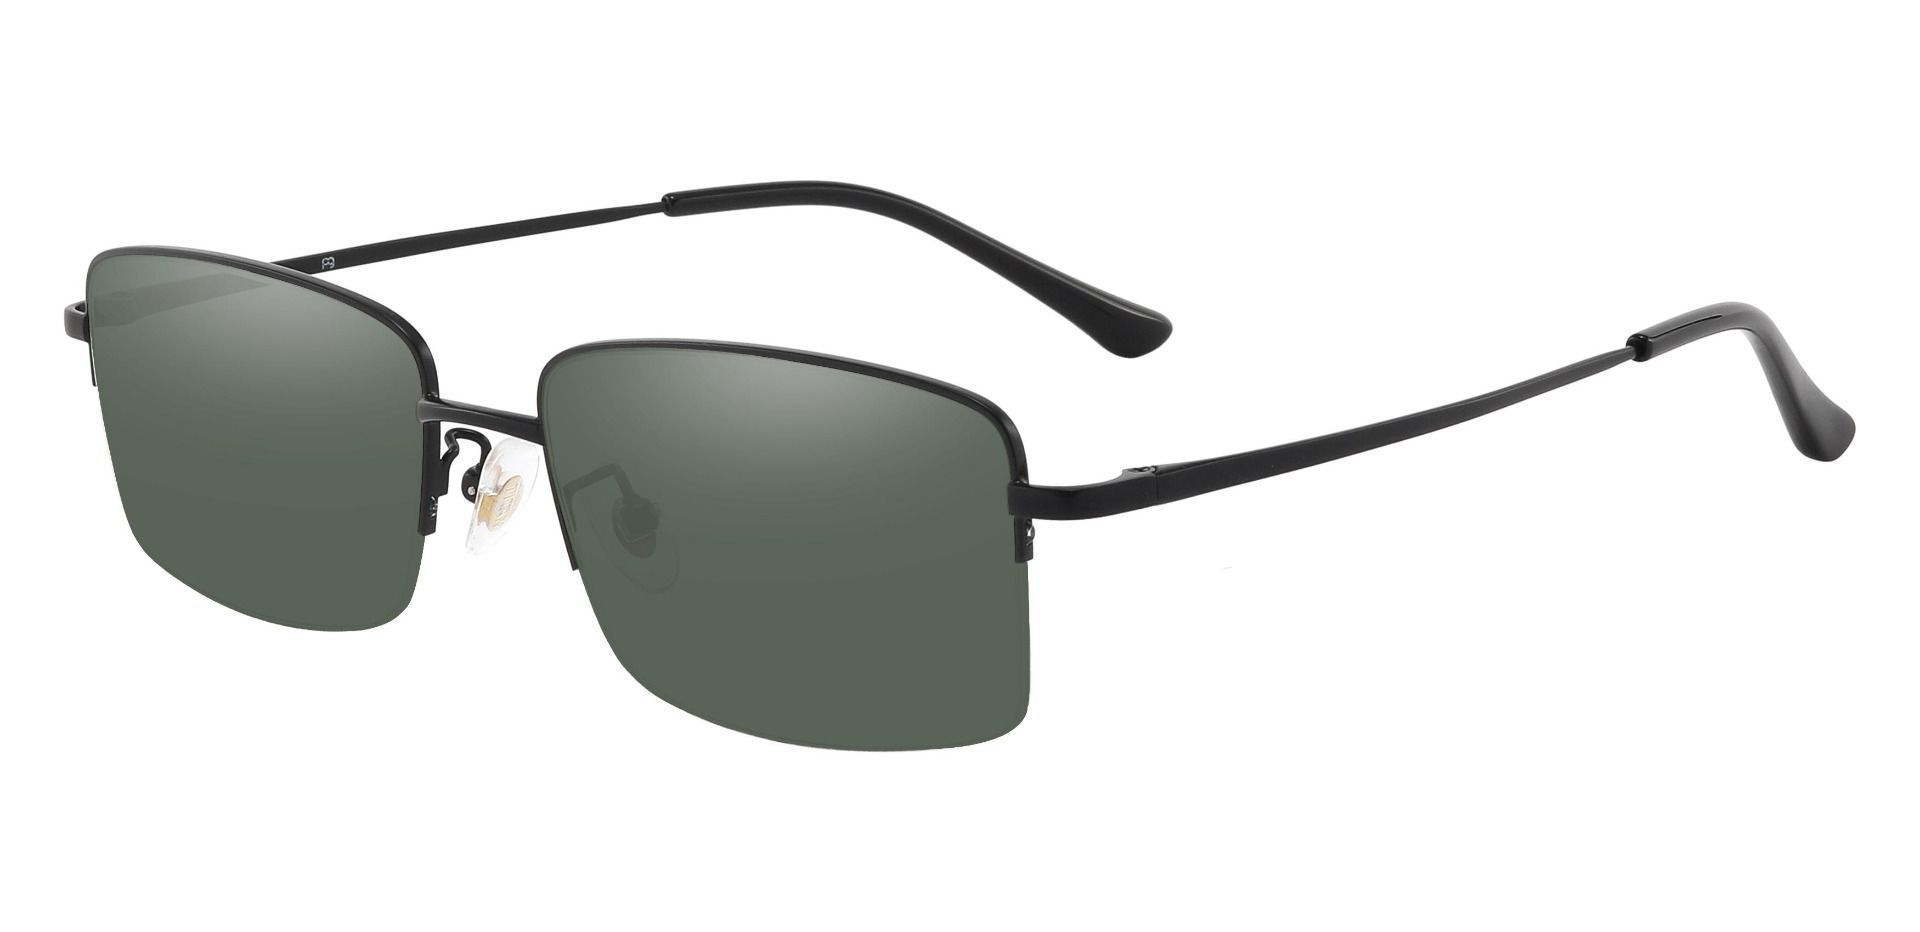 Bellmont Rectangle Non-Rx Sunglasses - Black Frame With Green Lenses